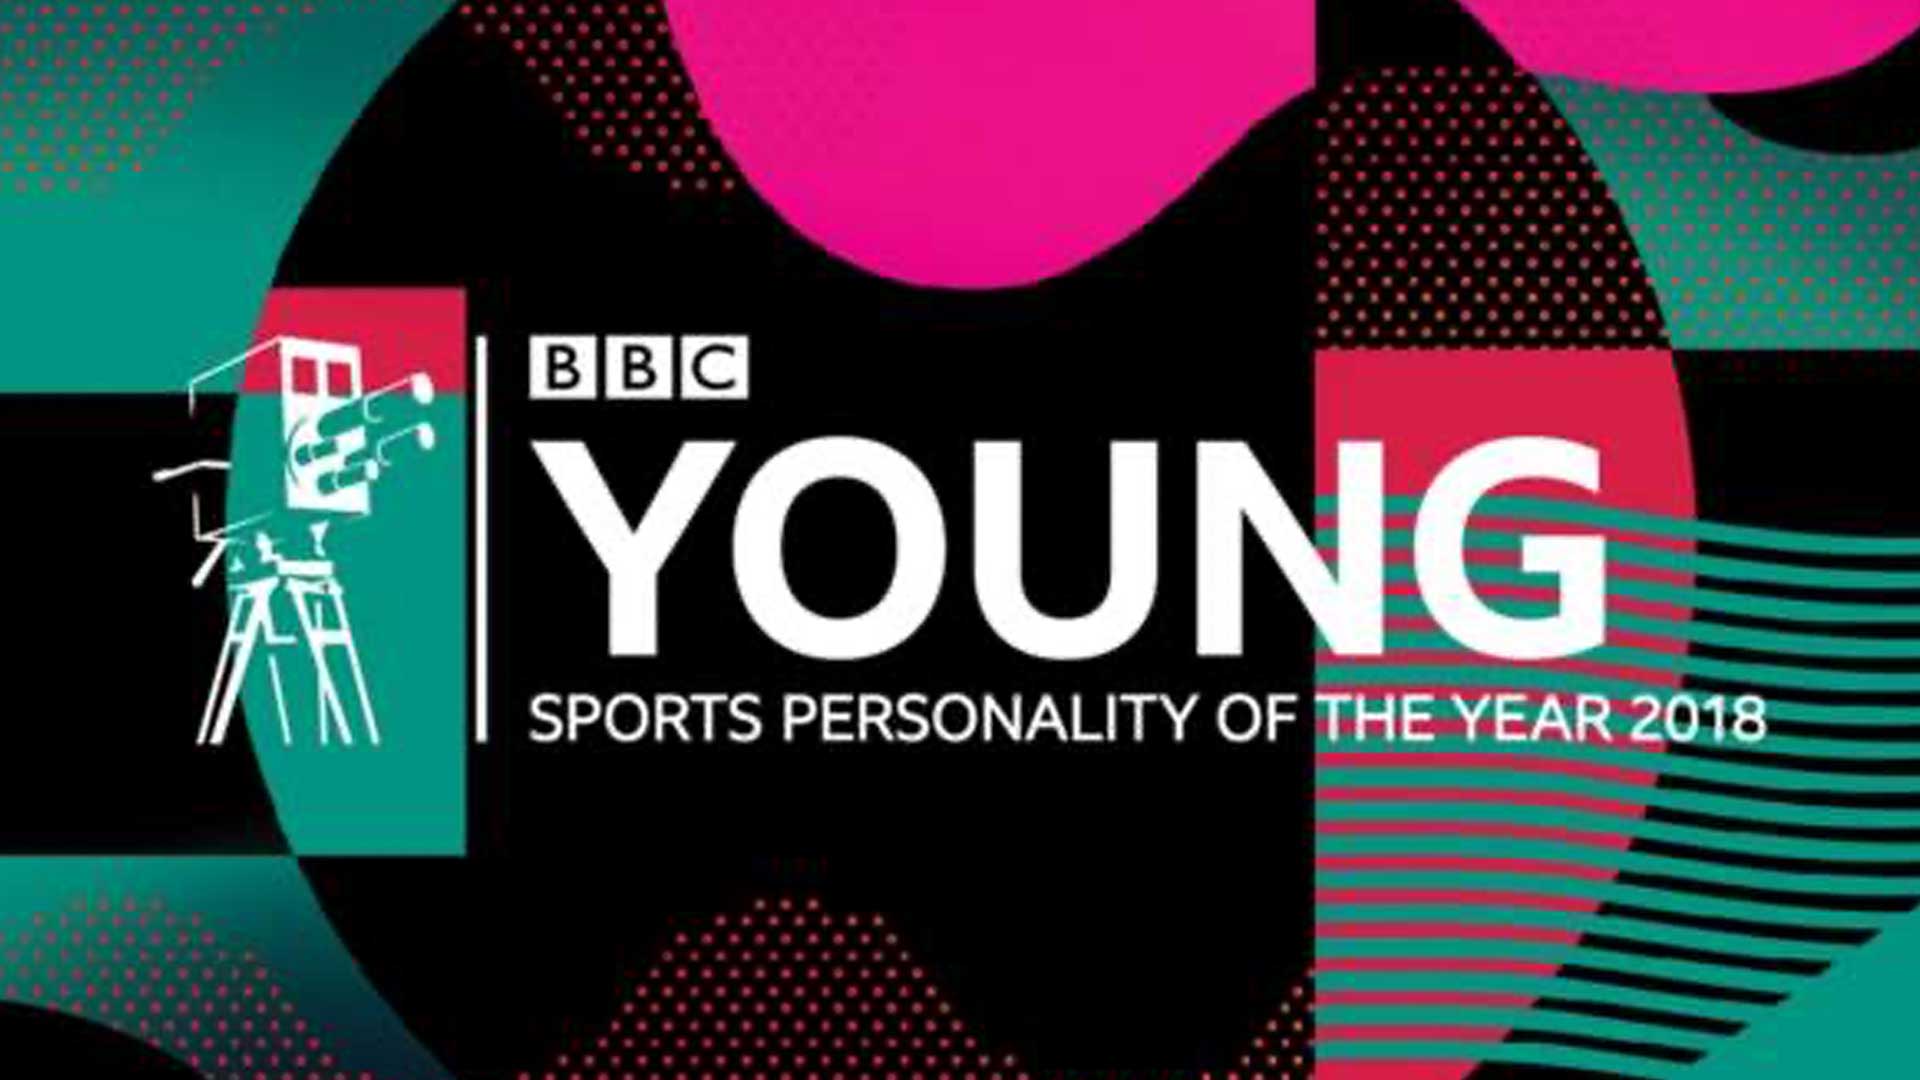 BBC Young Sports Personality of the Year 2018